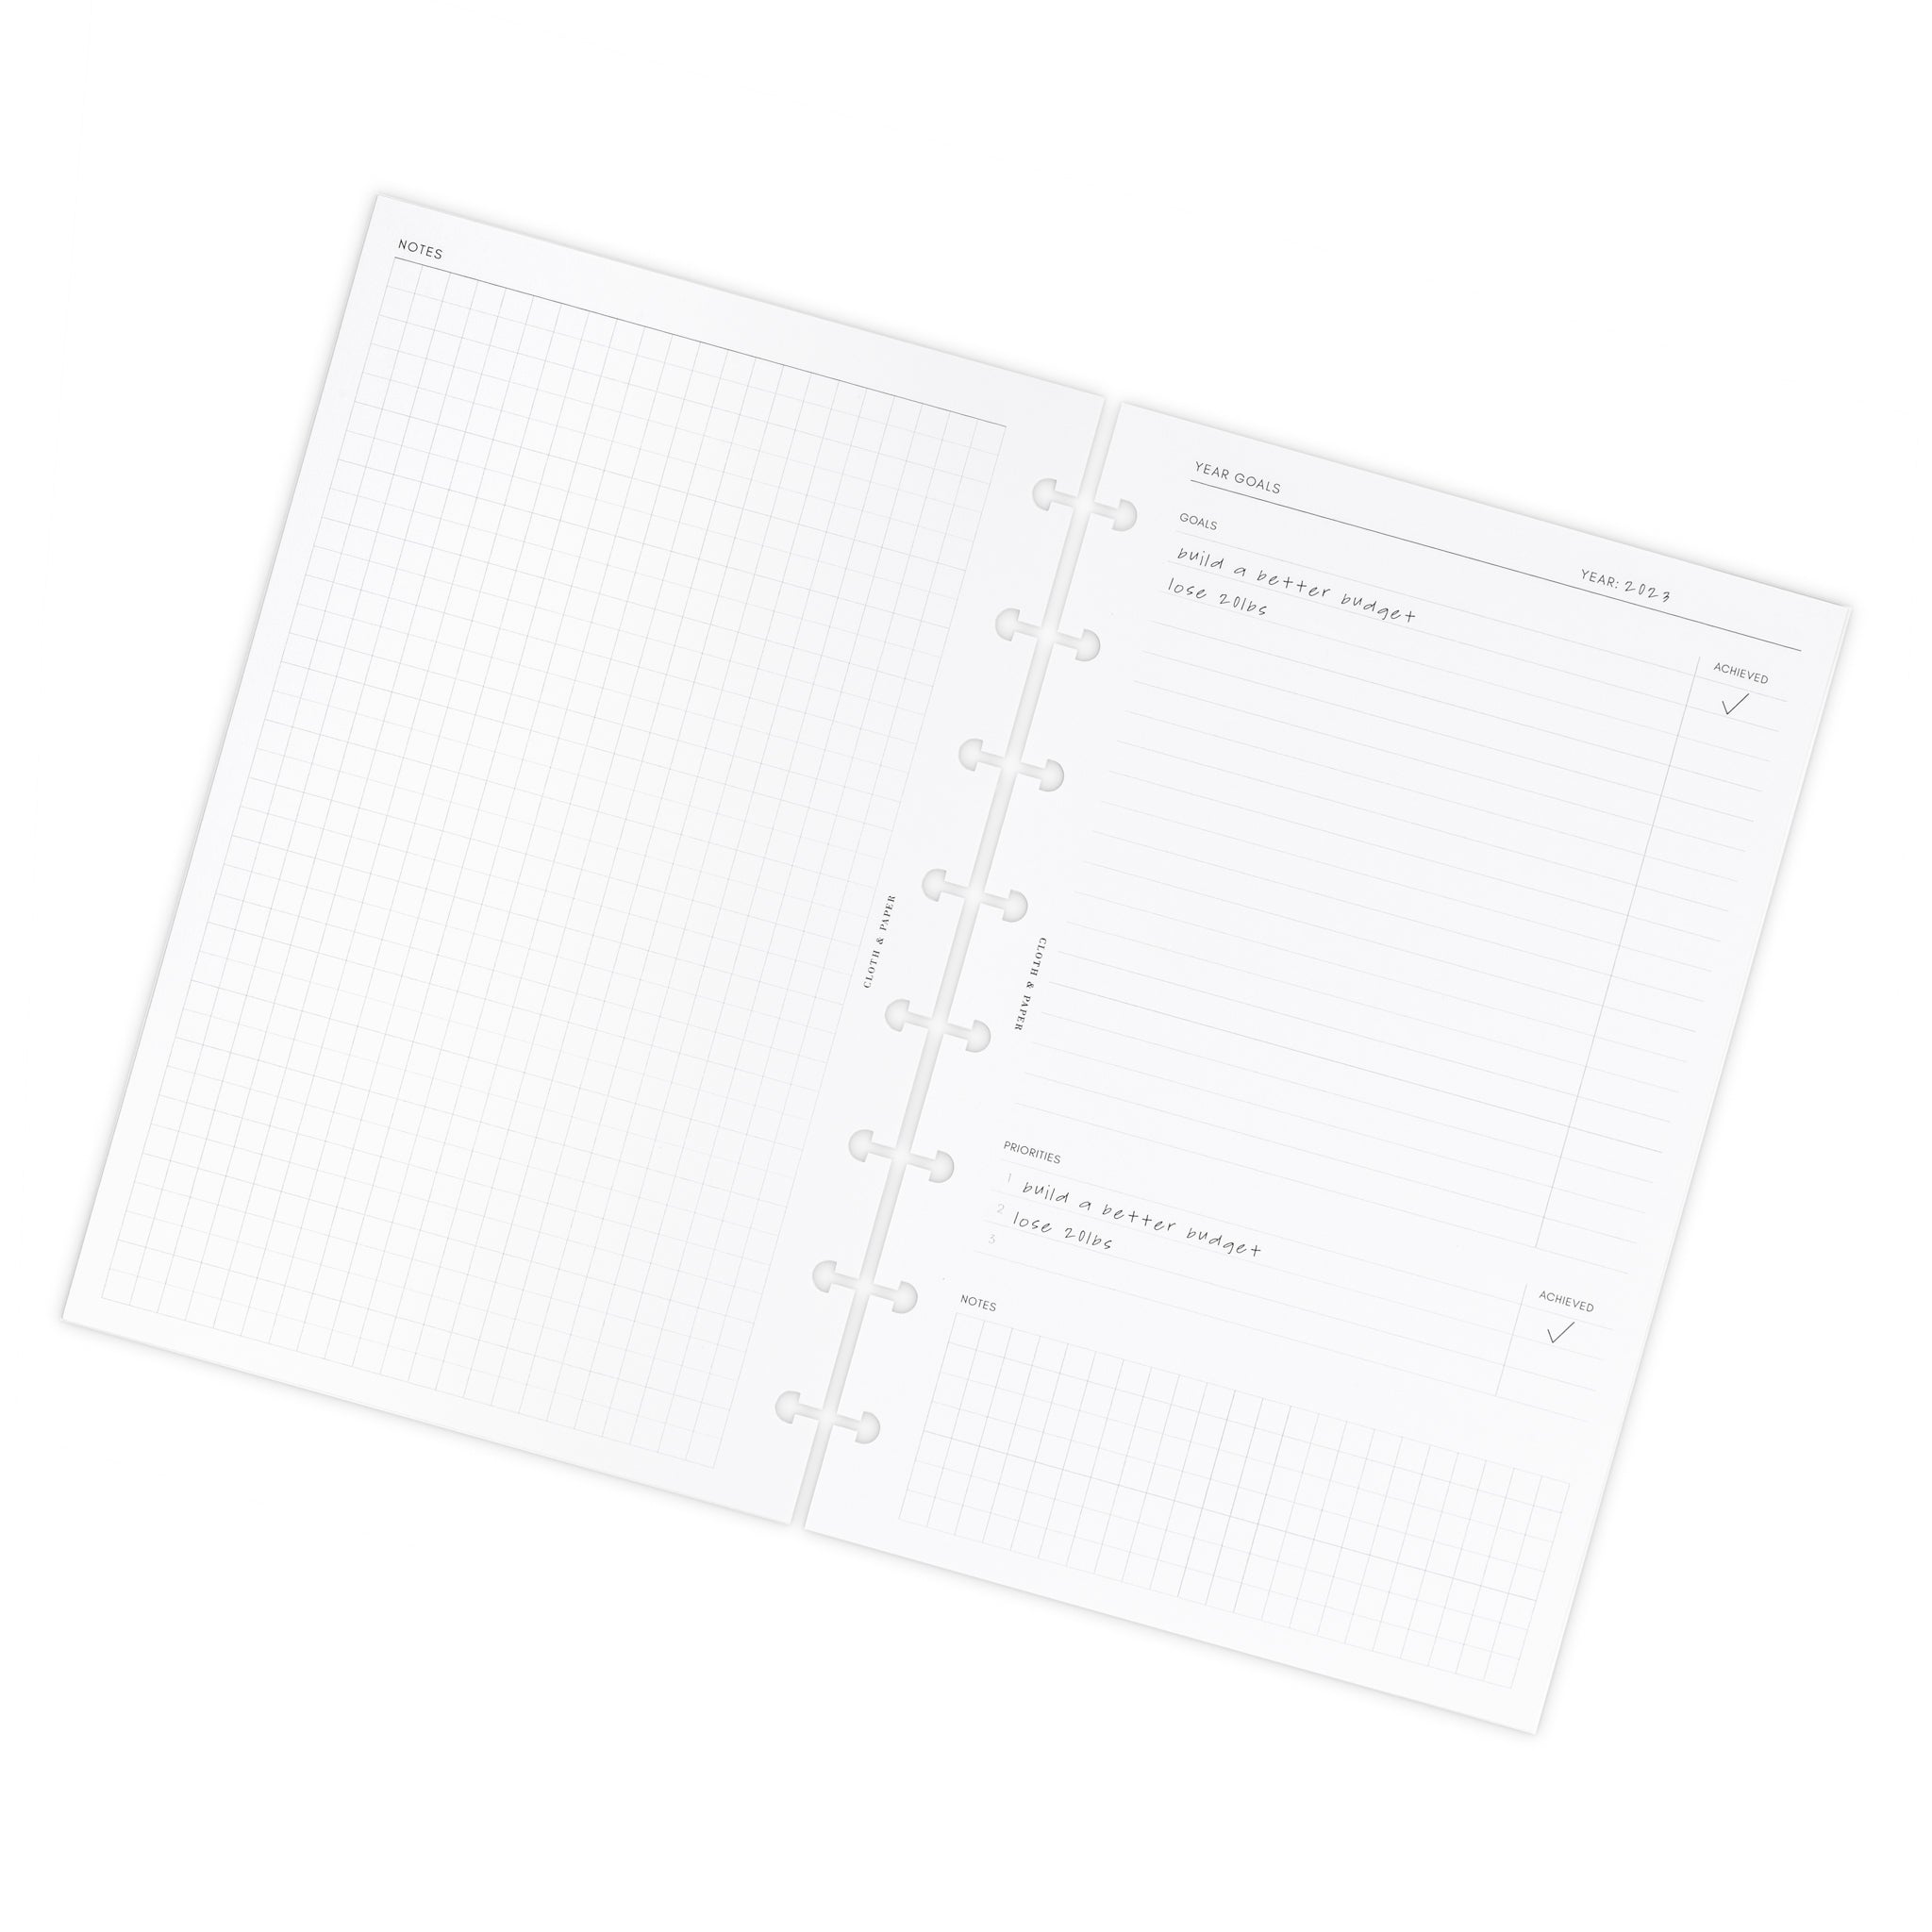 Budget Planning Set - A5 Size - Planner Inserts